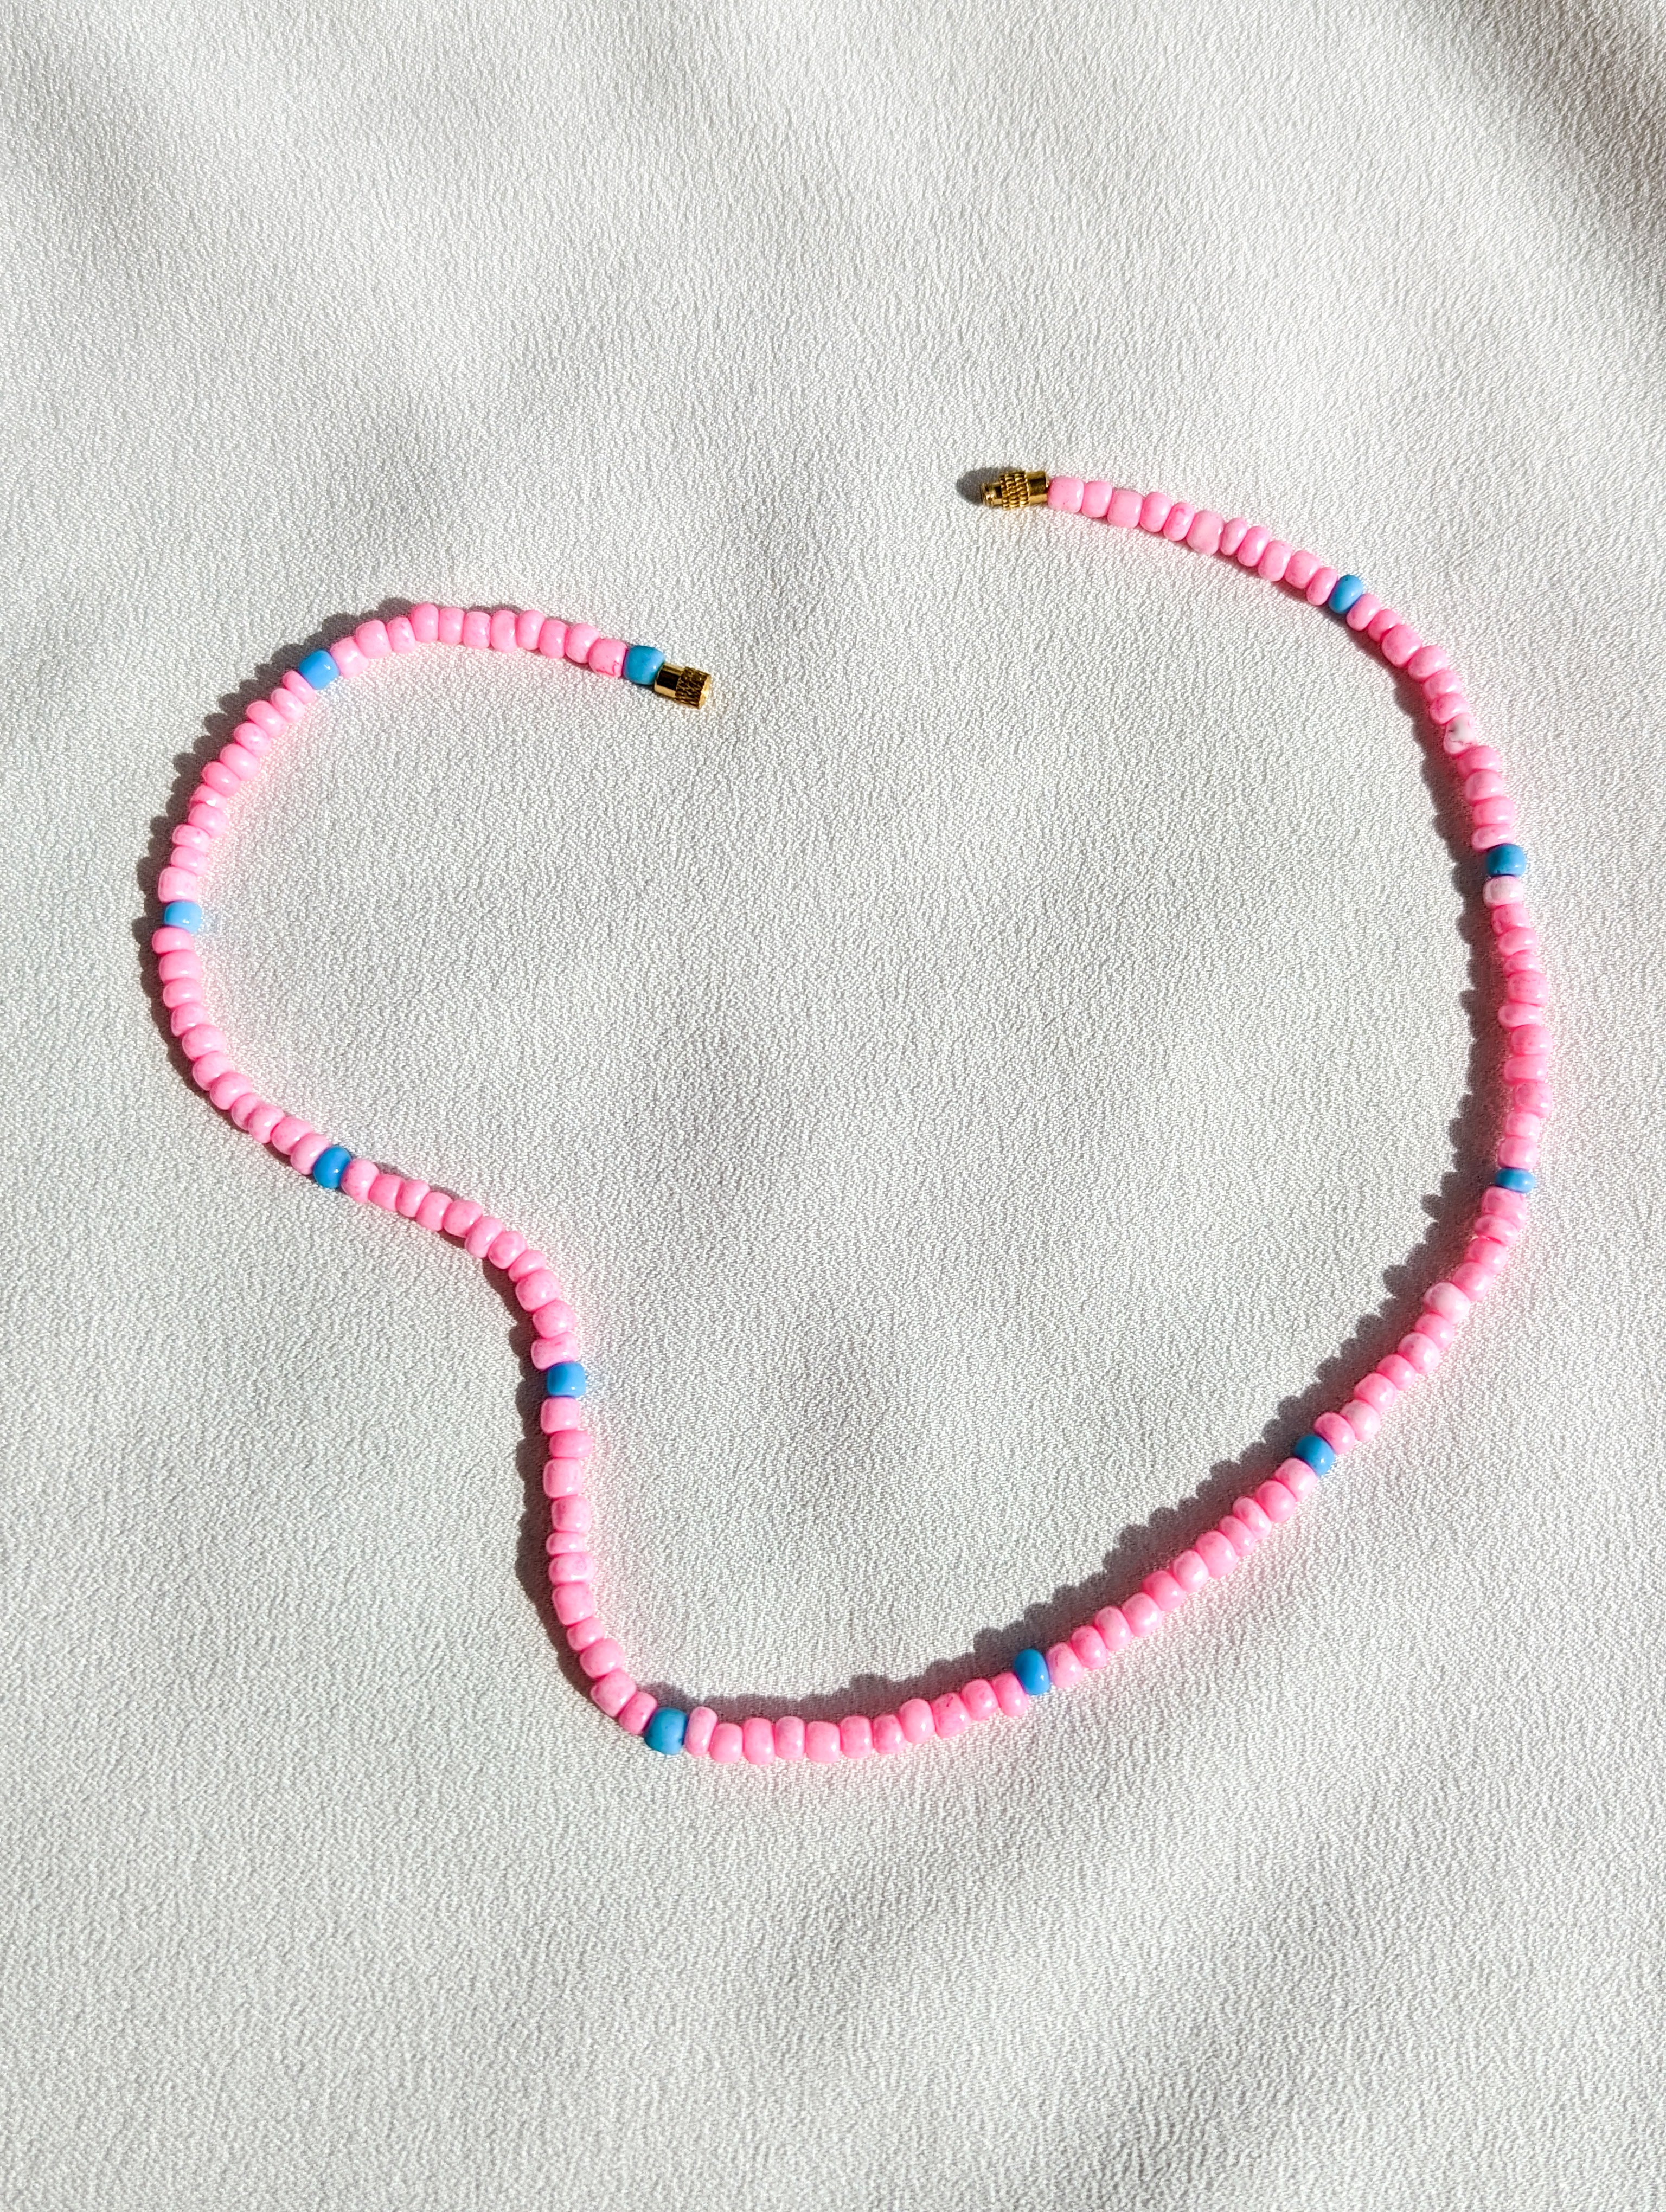 [THE ELEVEN] Necklace: Pink/Blue [Large Beads]